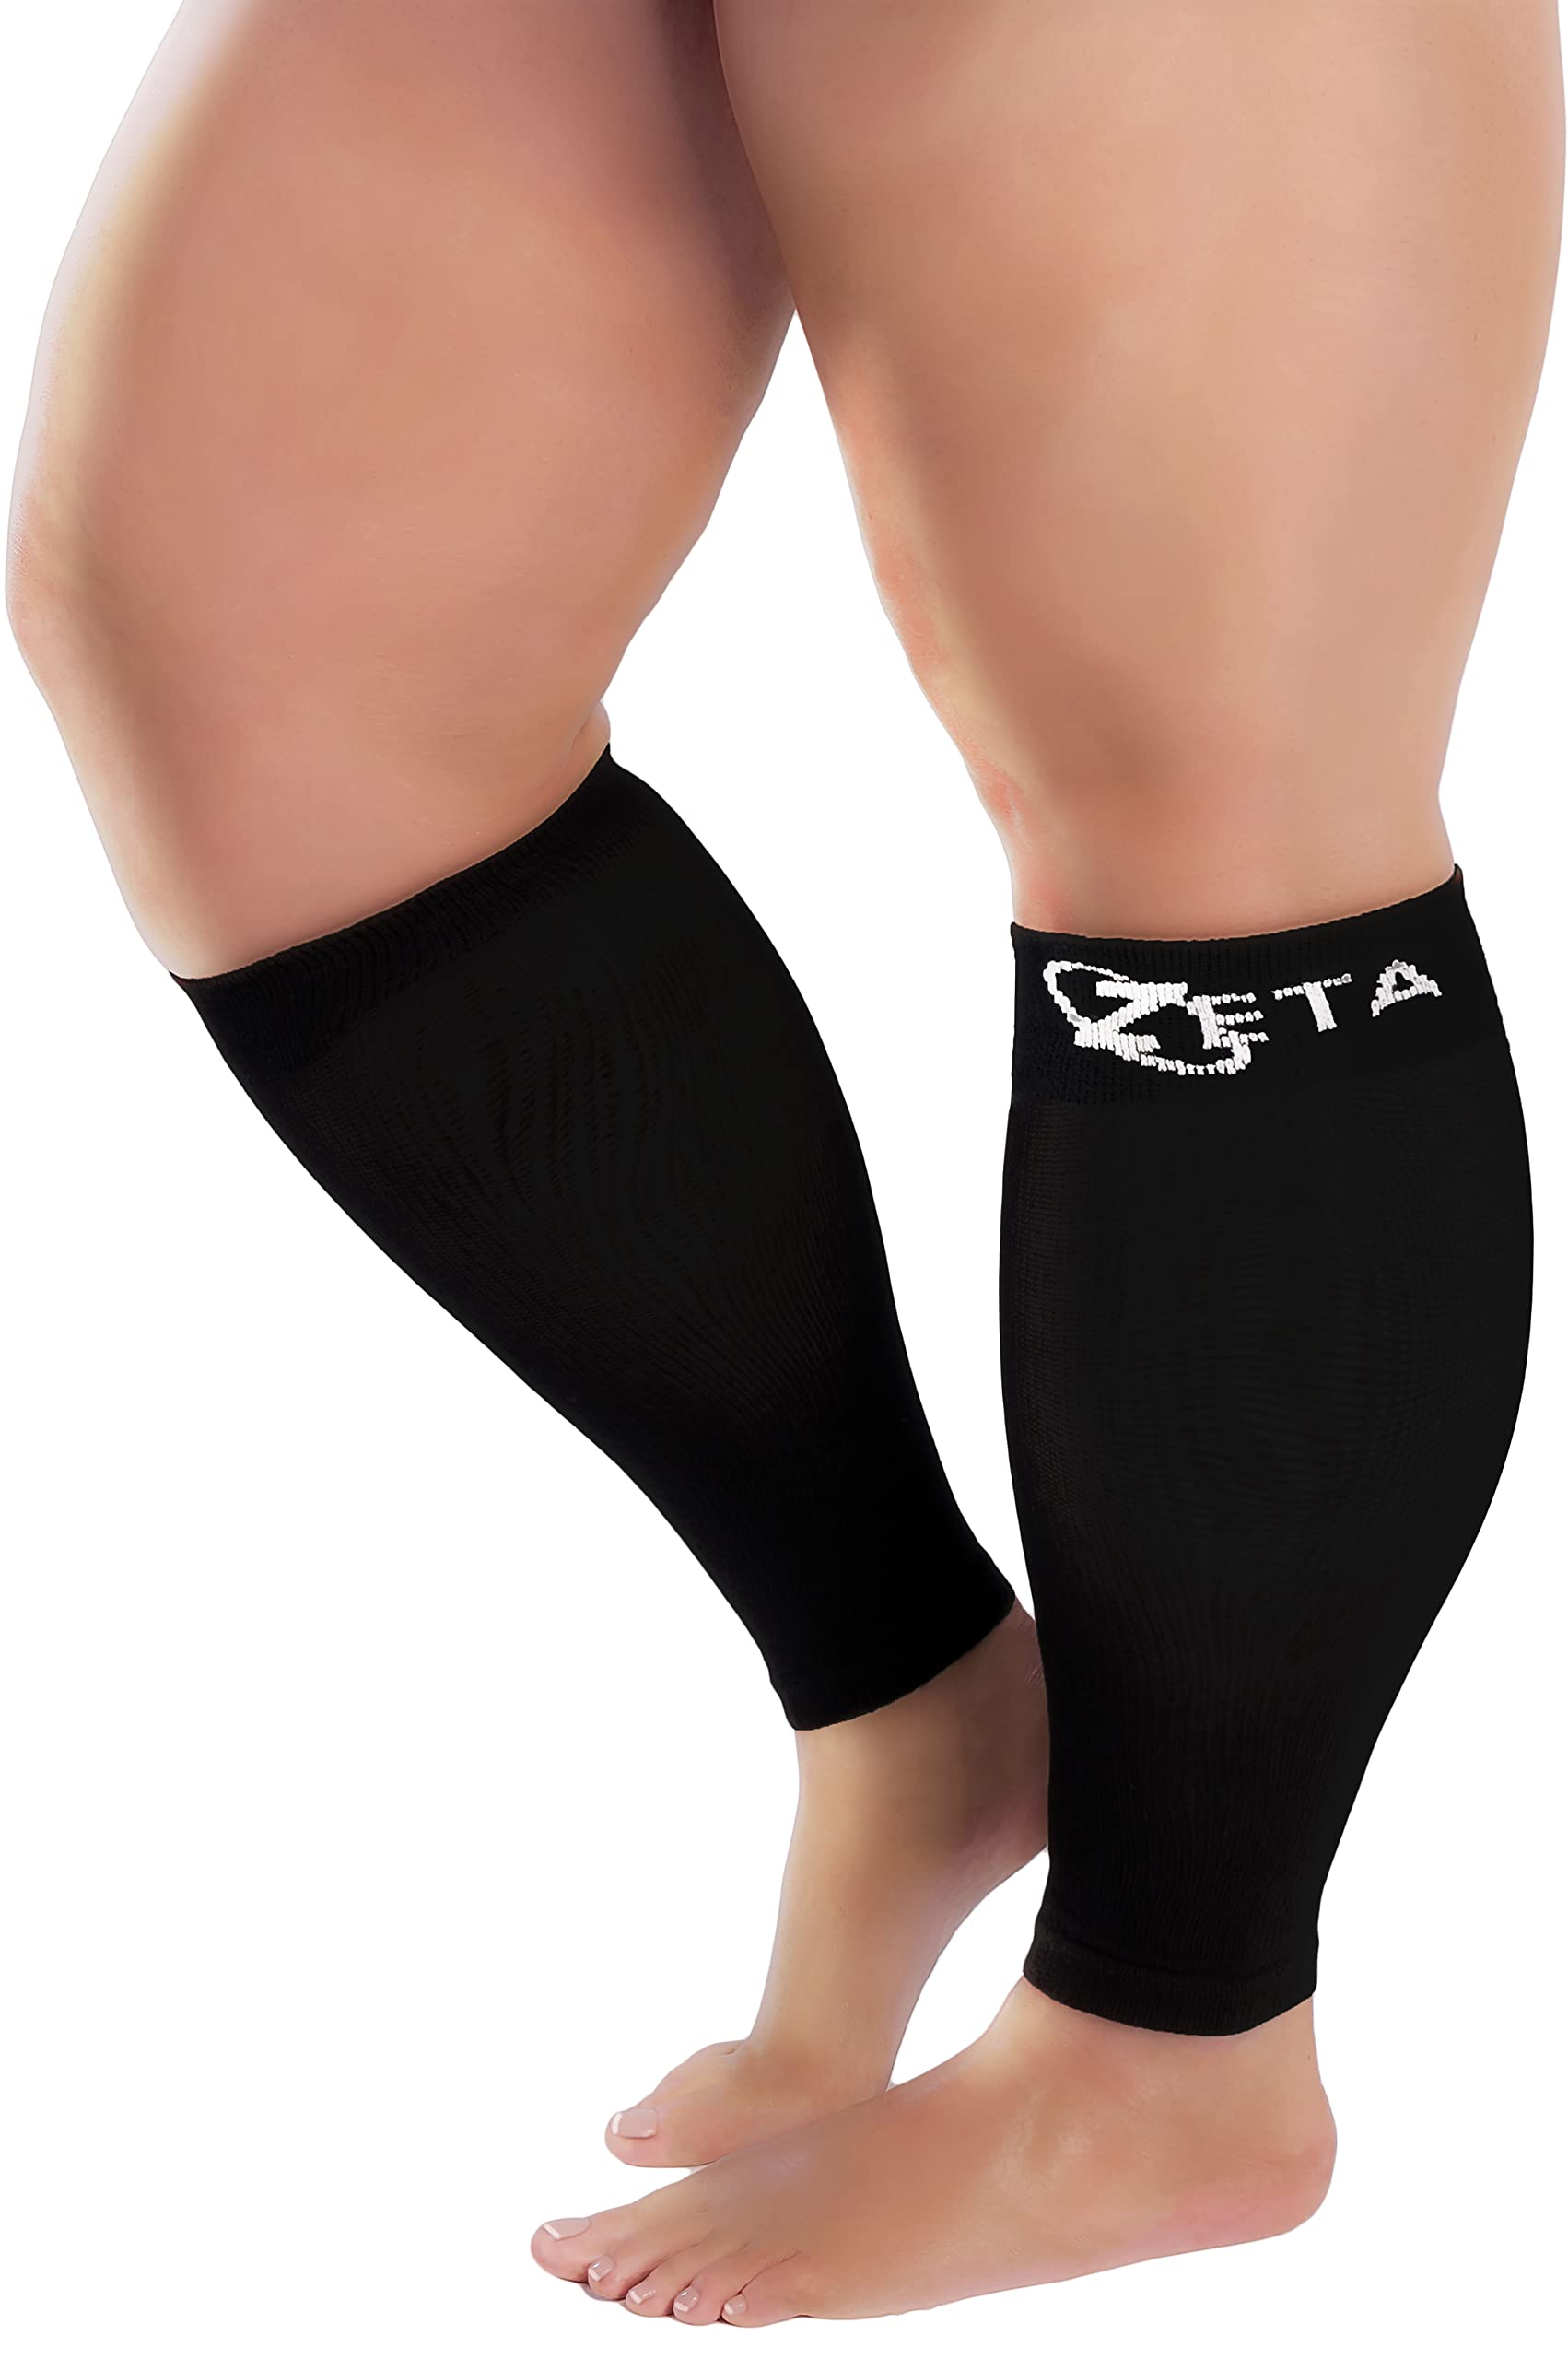  Zeta Wear Plus Size Short Length Leg Sleeve Support Socks - The  Wide Calf Compression Sleeve Women Love for Its Amazing Fit, Cotton-Rich  Comfort & Soothing Relief, 1 Pair, Small, Black 